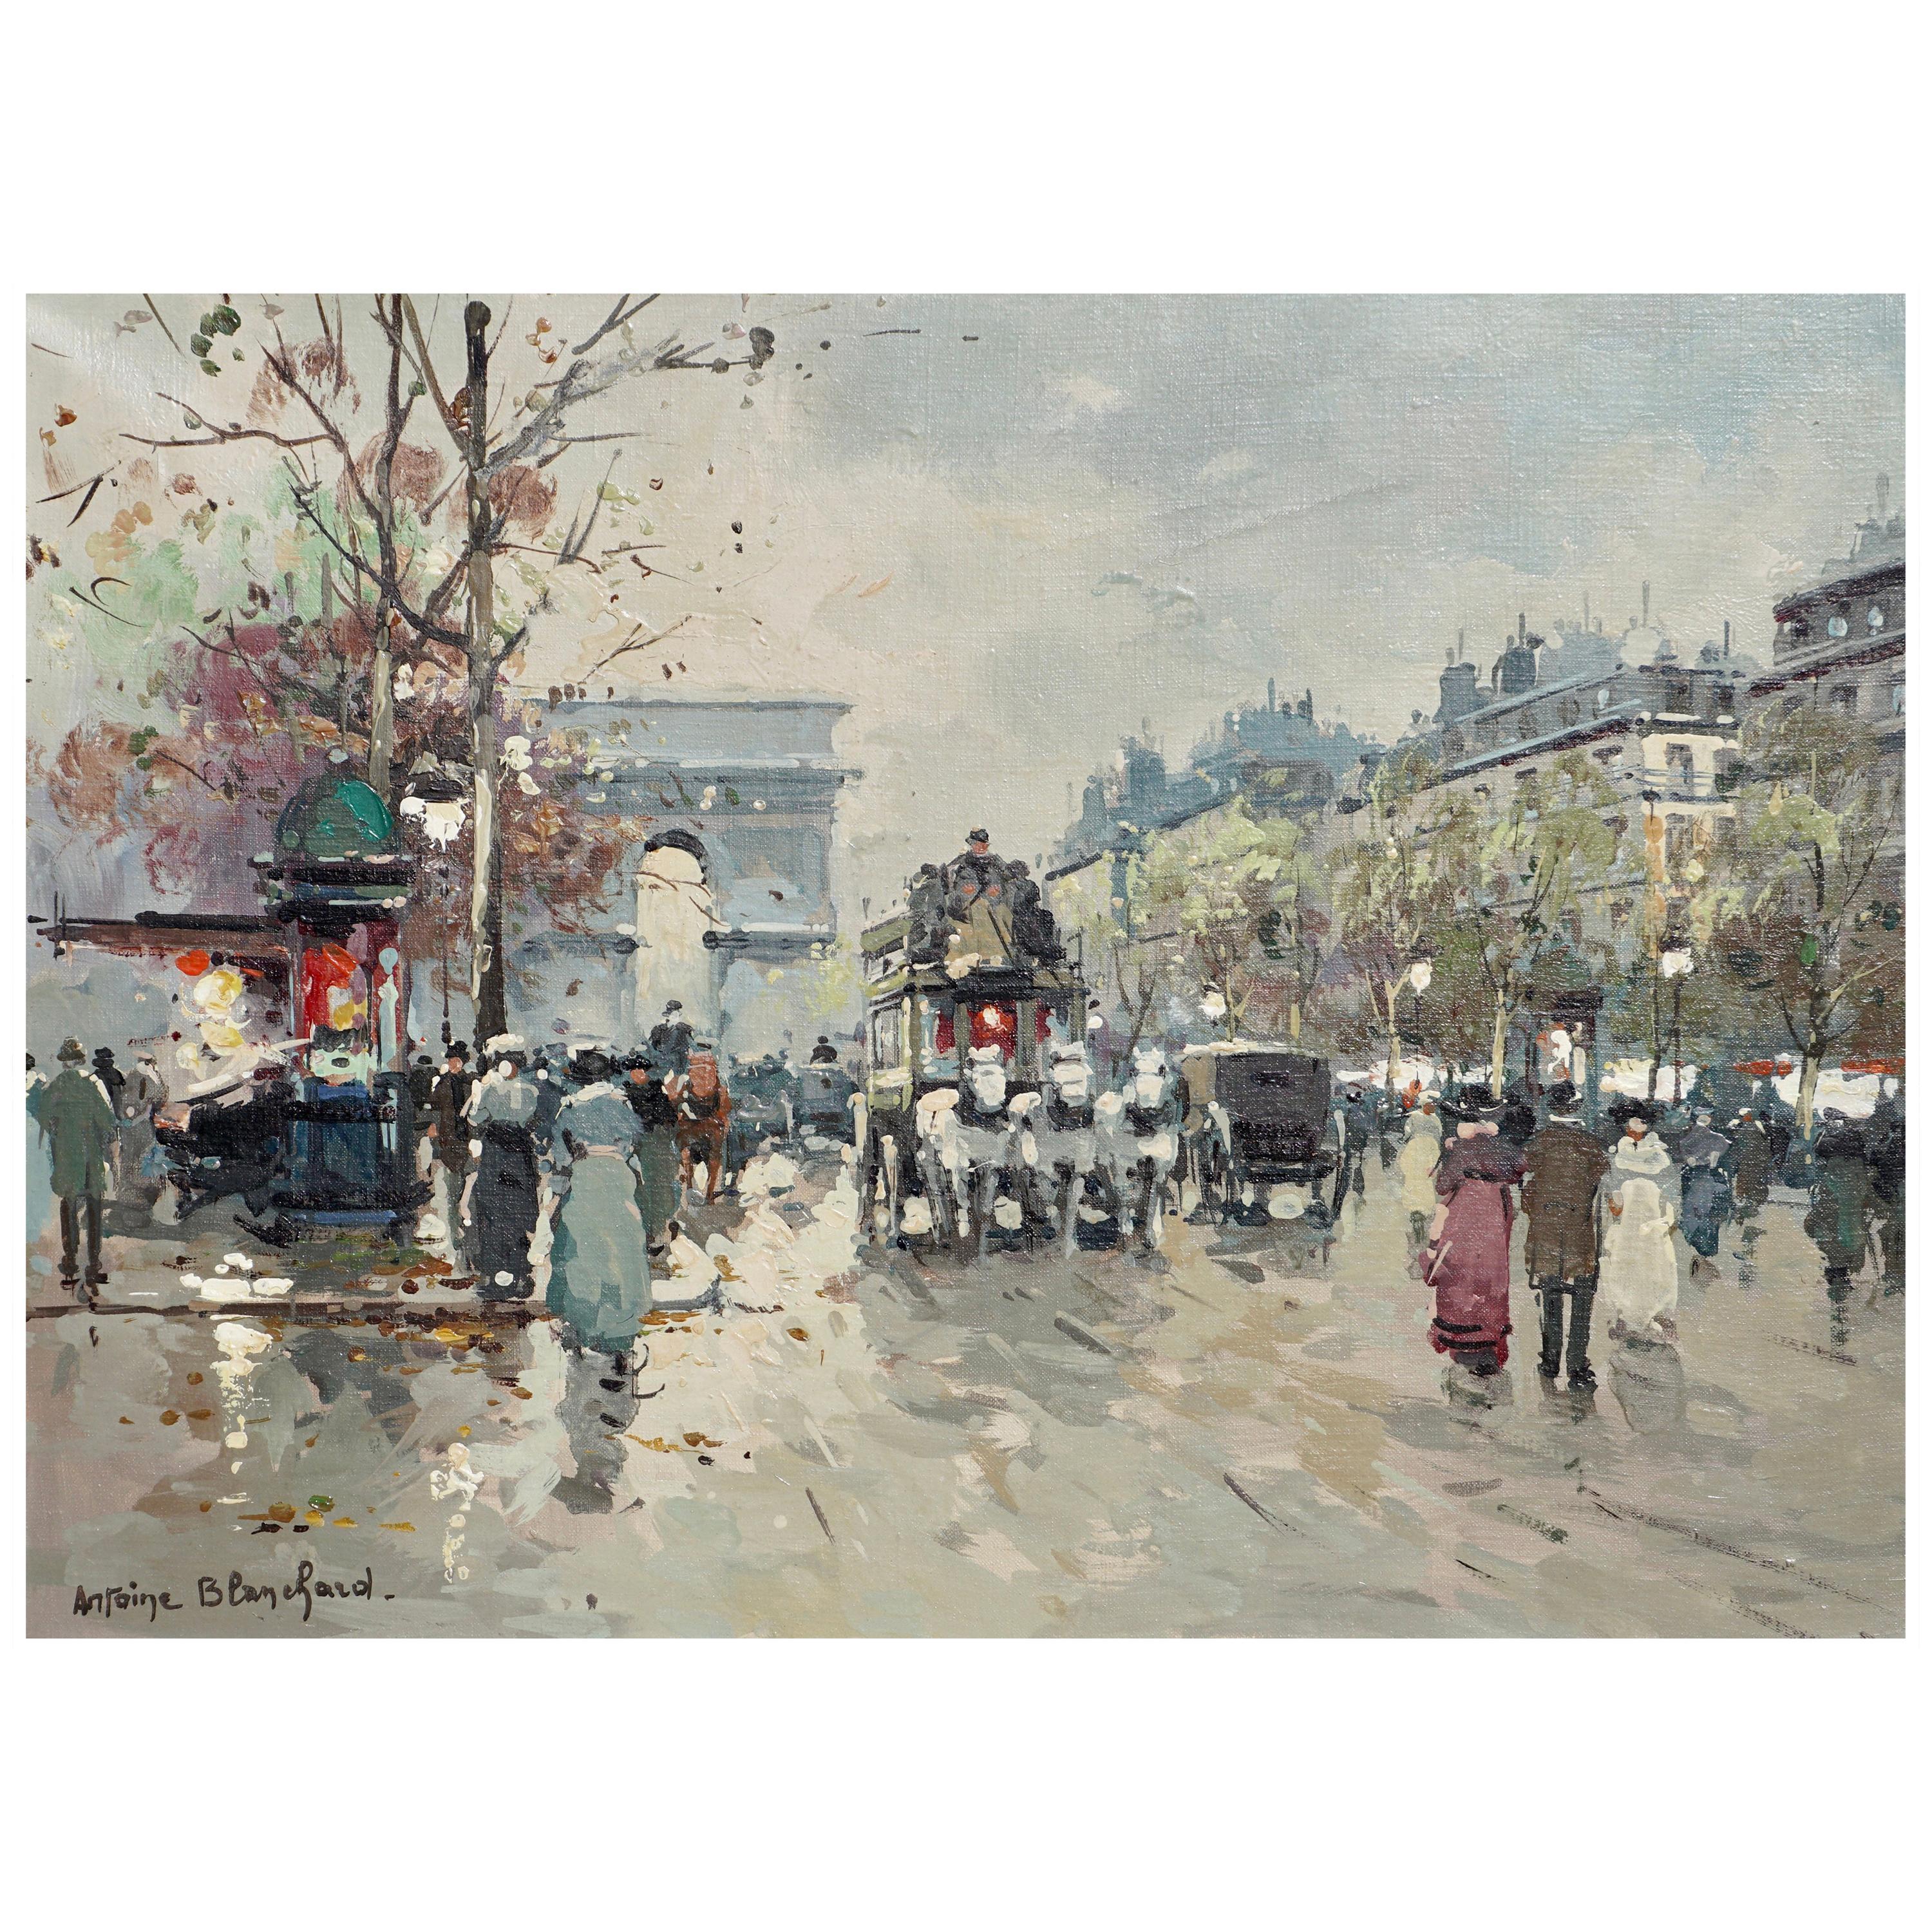 Antoine Blanchard, oil on canvas, "L' Arc de Triumphe", Circa 1950. A typical rainy day on the boulevards of Paris with horse drawn carriages and pedestrians getting on with their day.

Signed B/L and verso. 

Painting: 13 Inches x 18 Inches.
Frame: